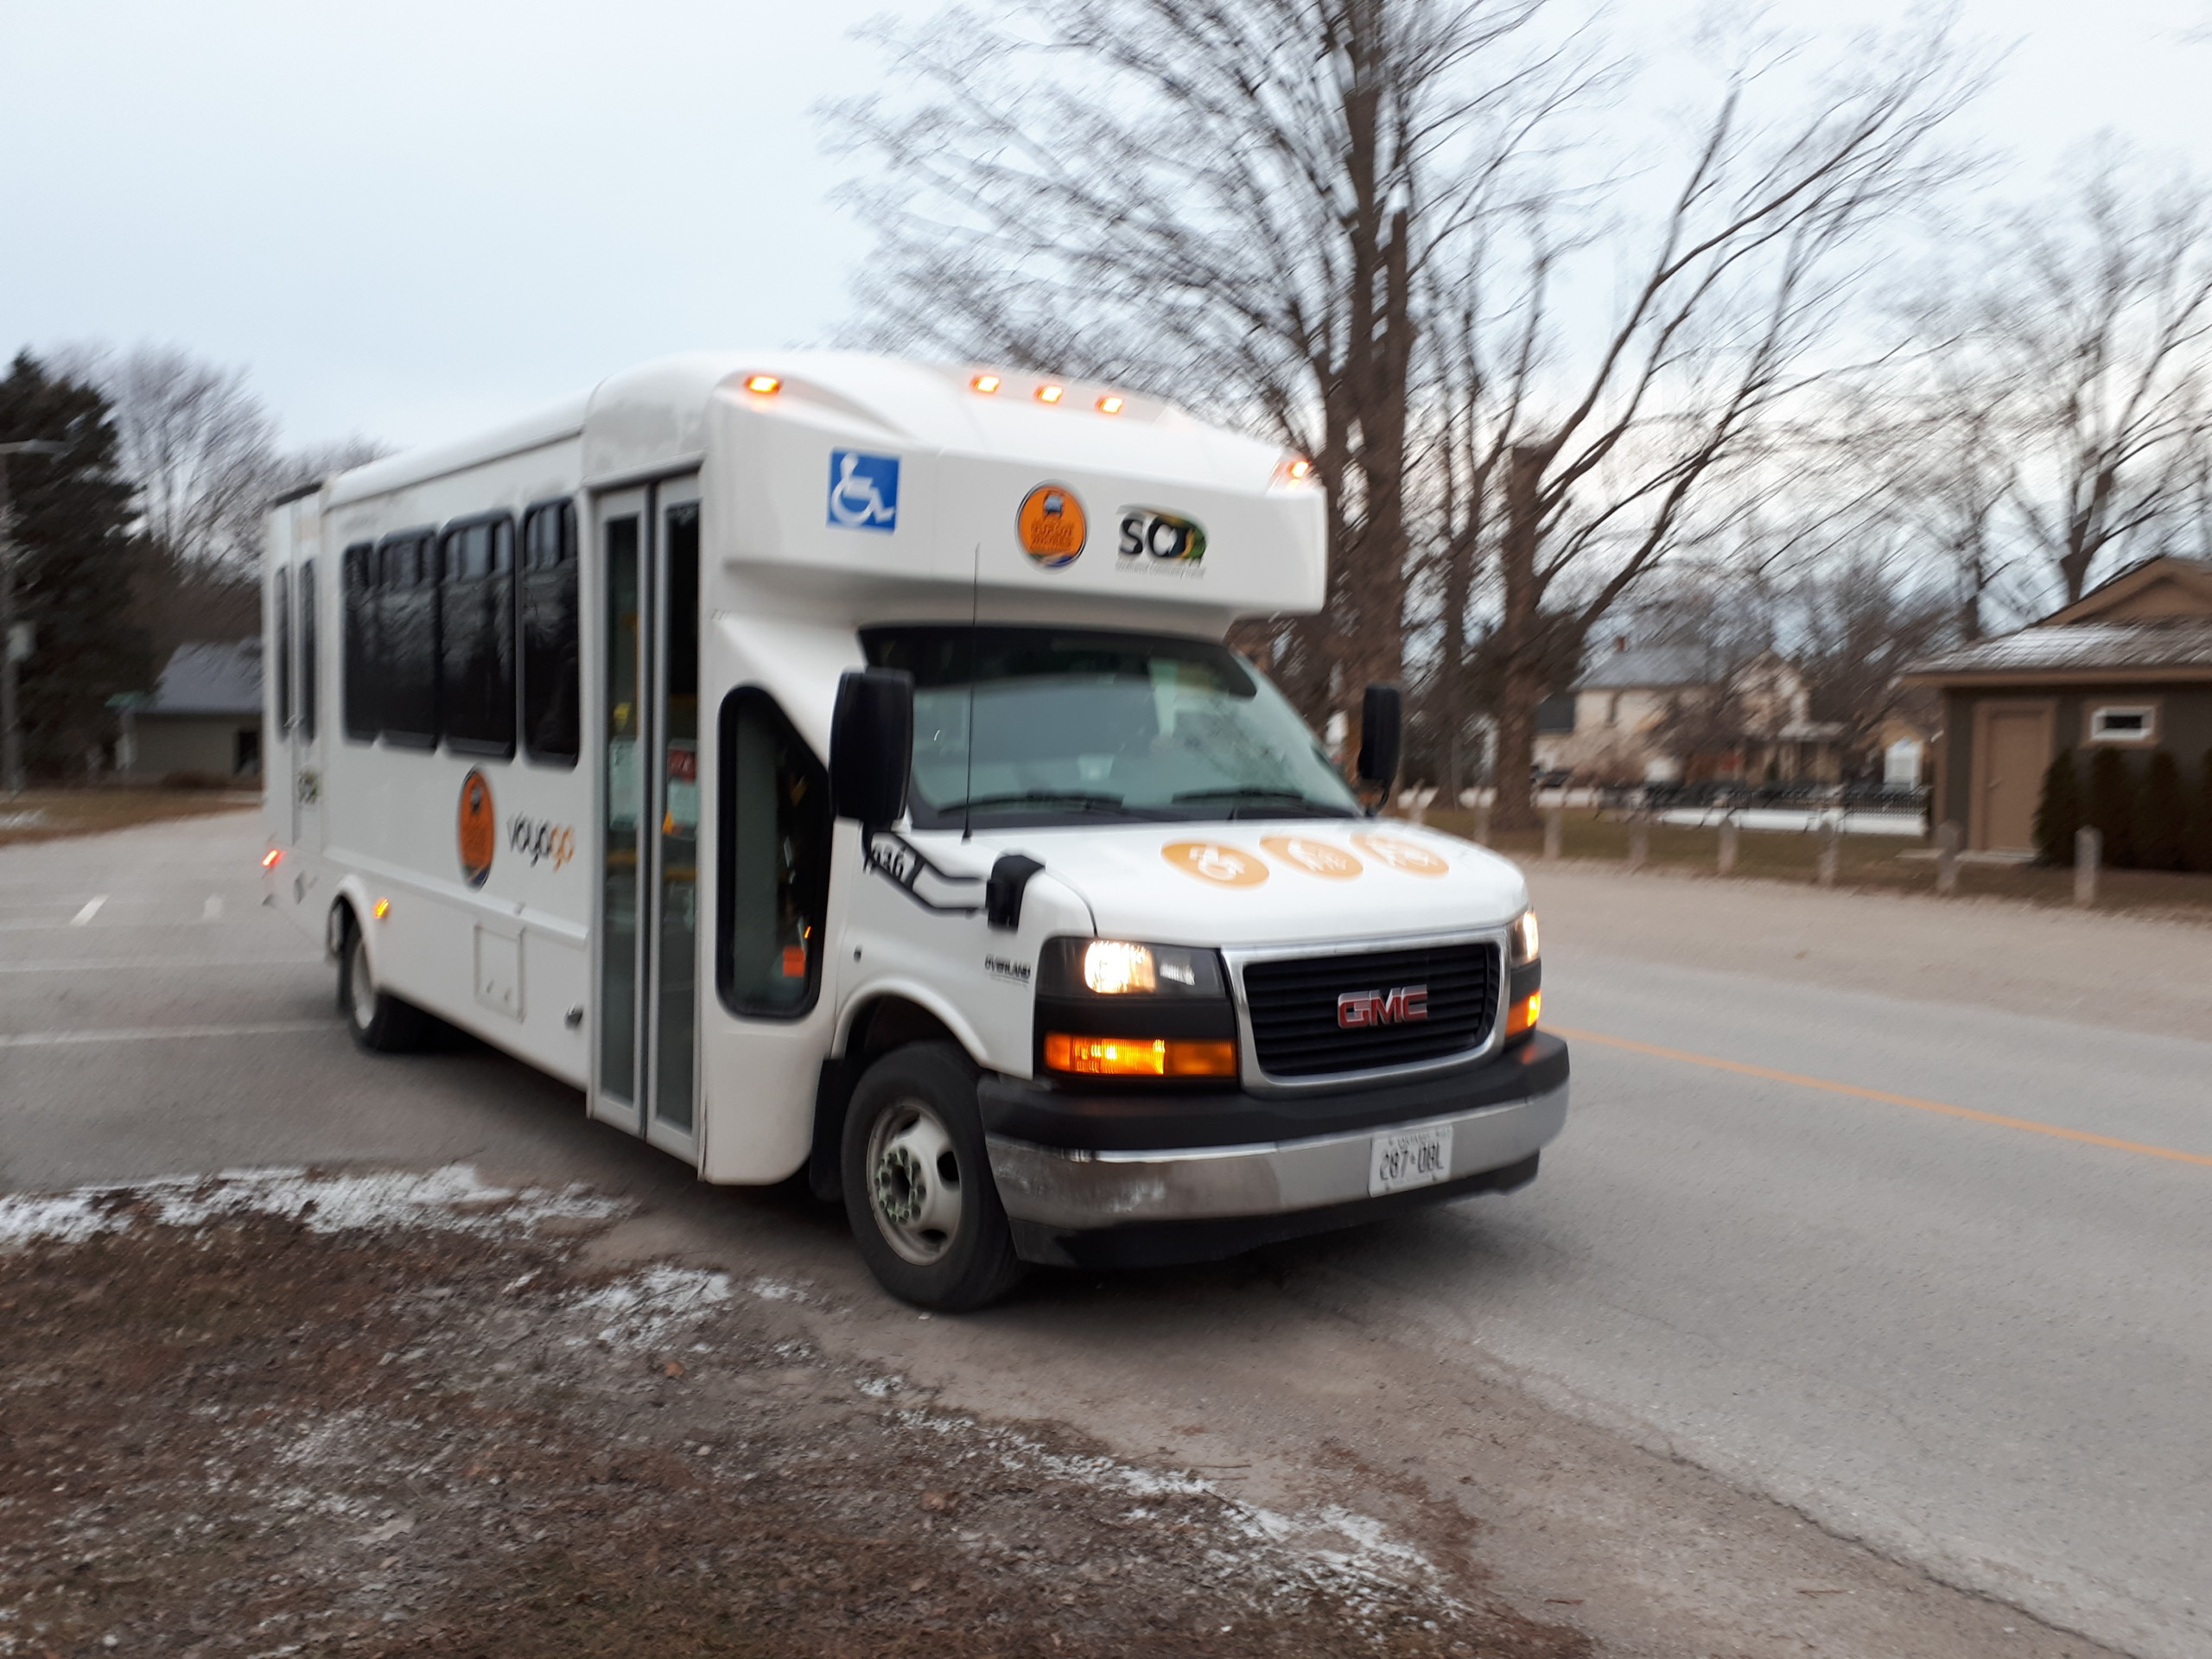 security cameras installed on local transit service buses scaled